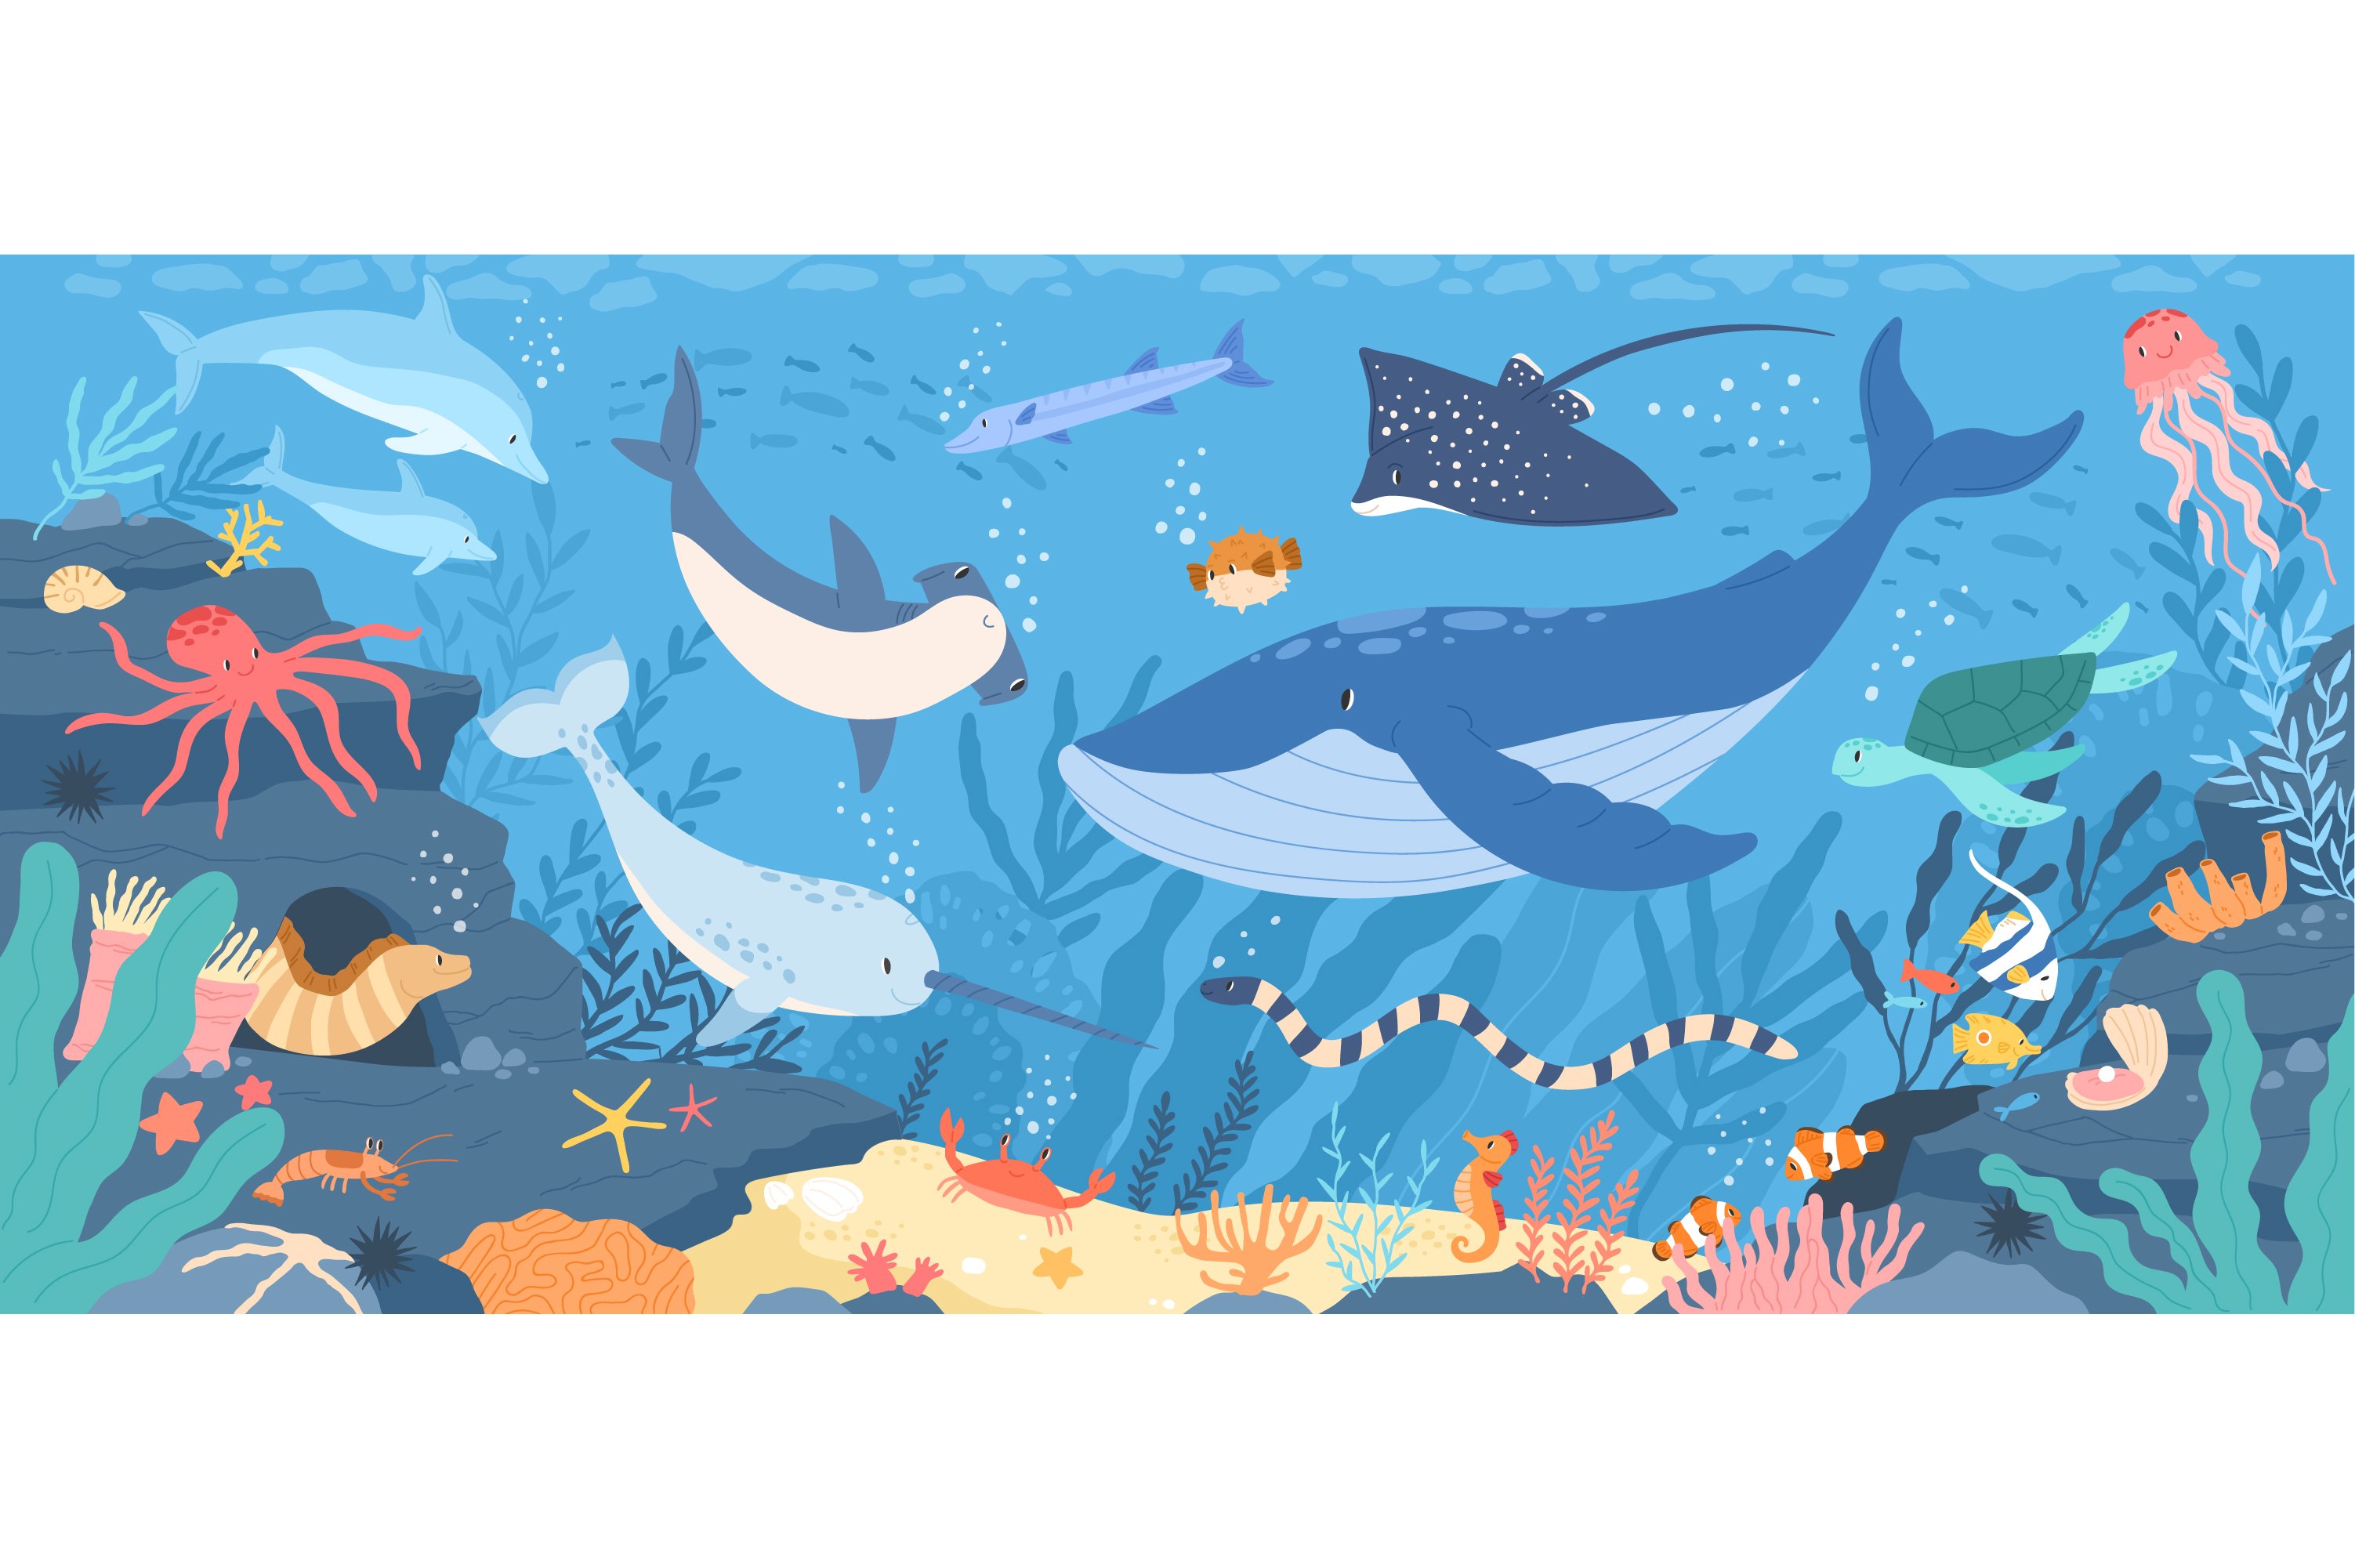 Fish and marine animals in ocean cover image.